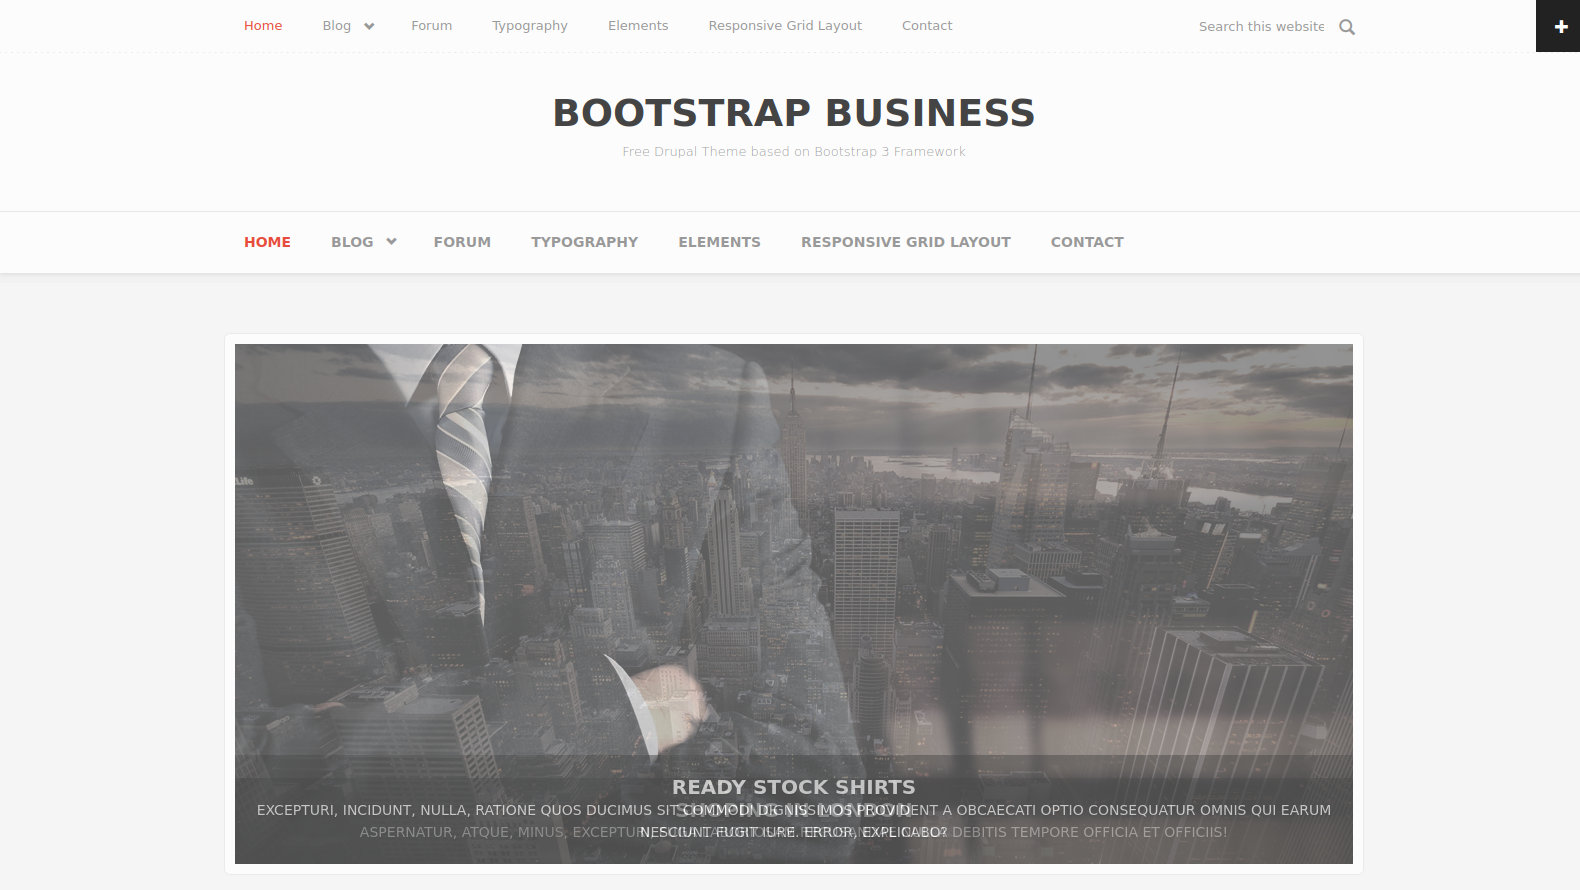 Bootstrap Business: A free Drupal theme based on the Bootstrap 3